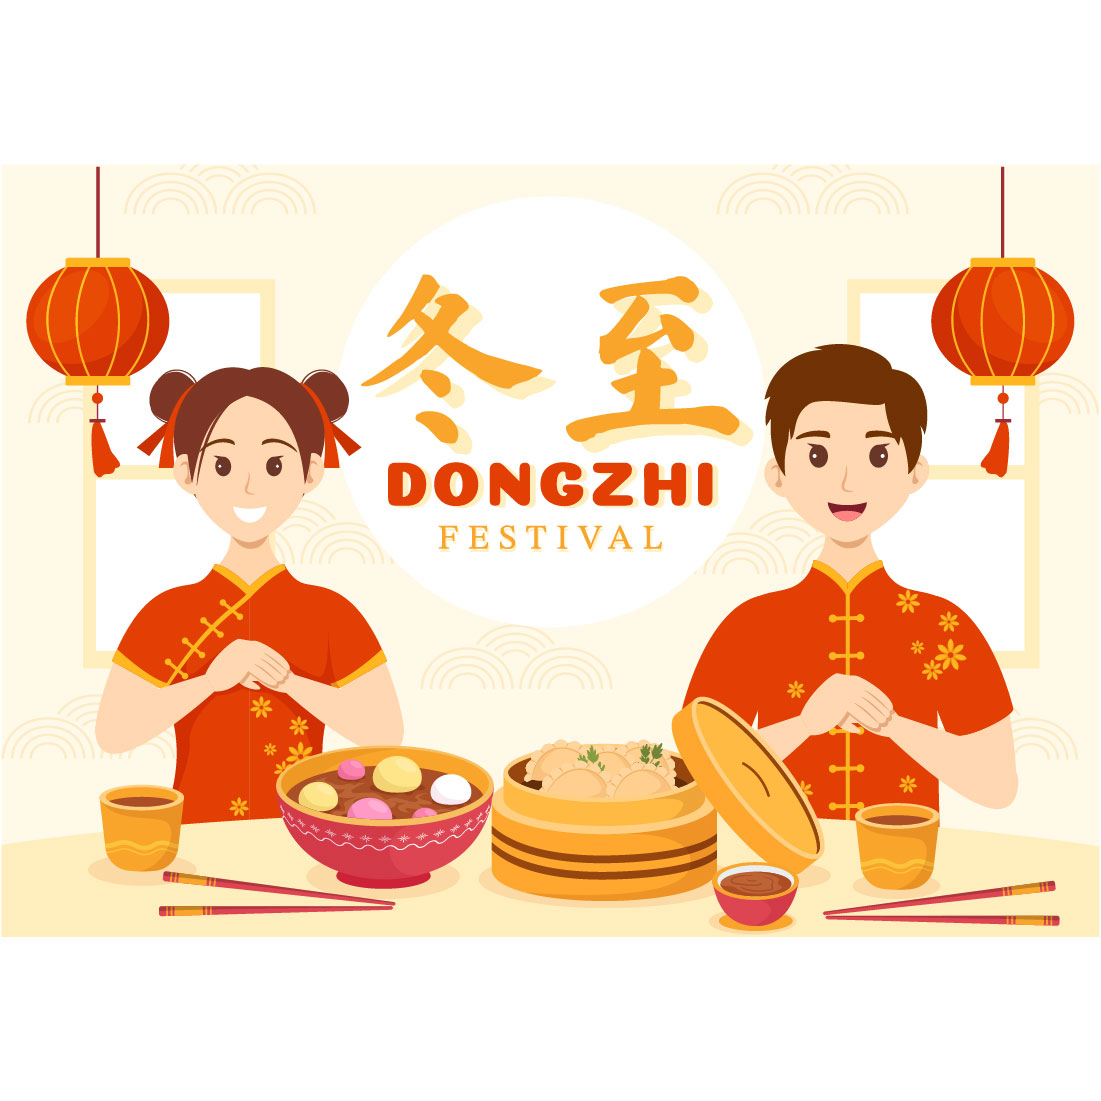 13 Dongzhi or Winter Solstice Festival Illustration preview image.